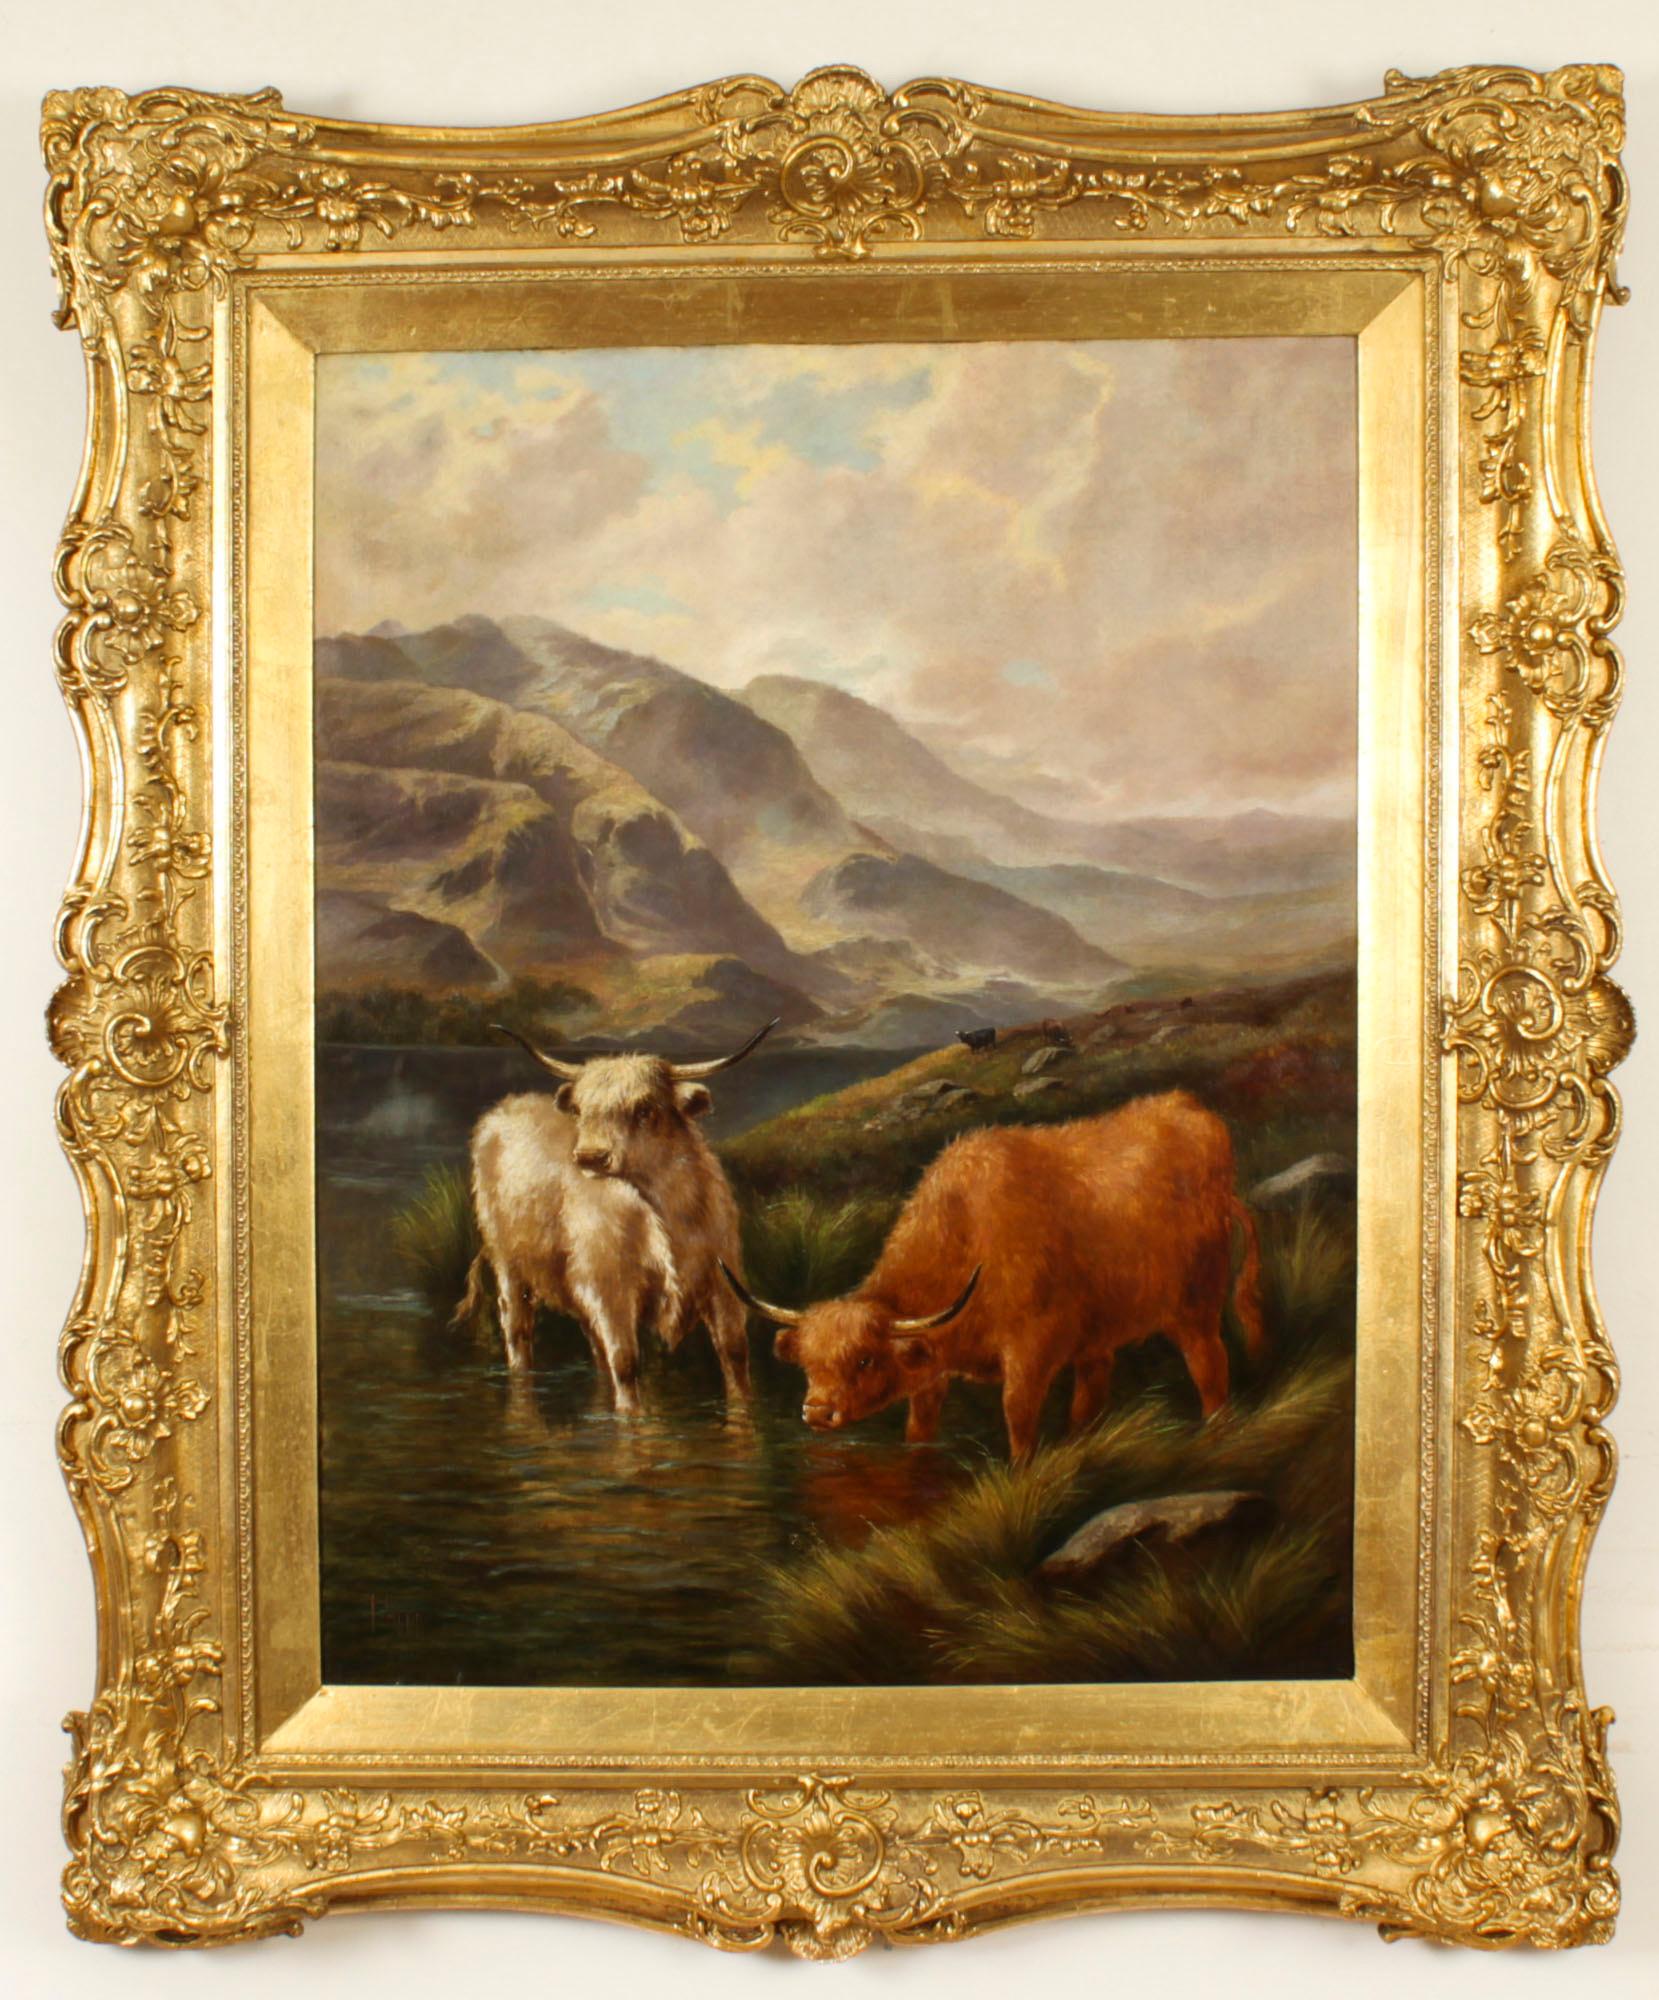 A highly atmospheric pair of paintings of Highland Cattle in a Scottish landscape watering from the banks of the loch, with dramatic mountains behind, each signed  J.Henry by the artist.

Having grazed the higher slopes, the cattle make their way to